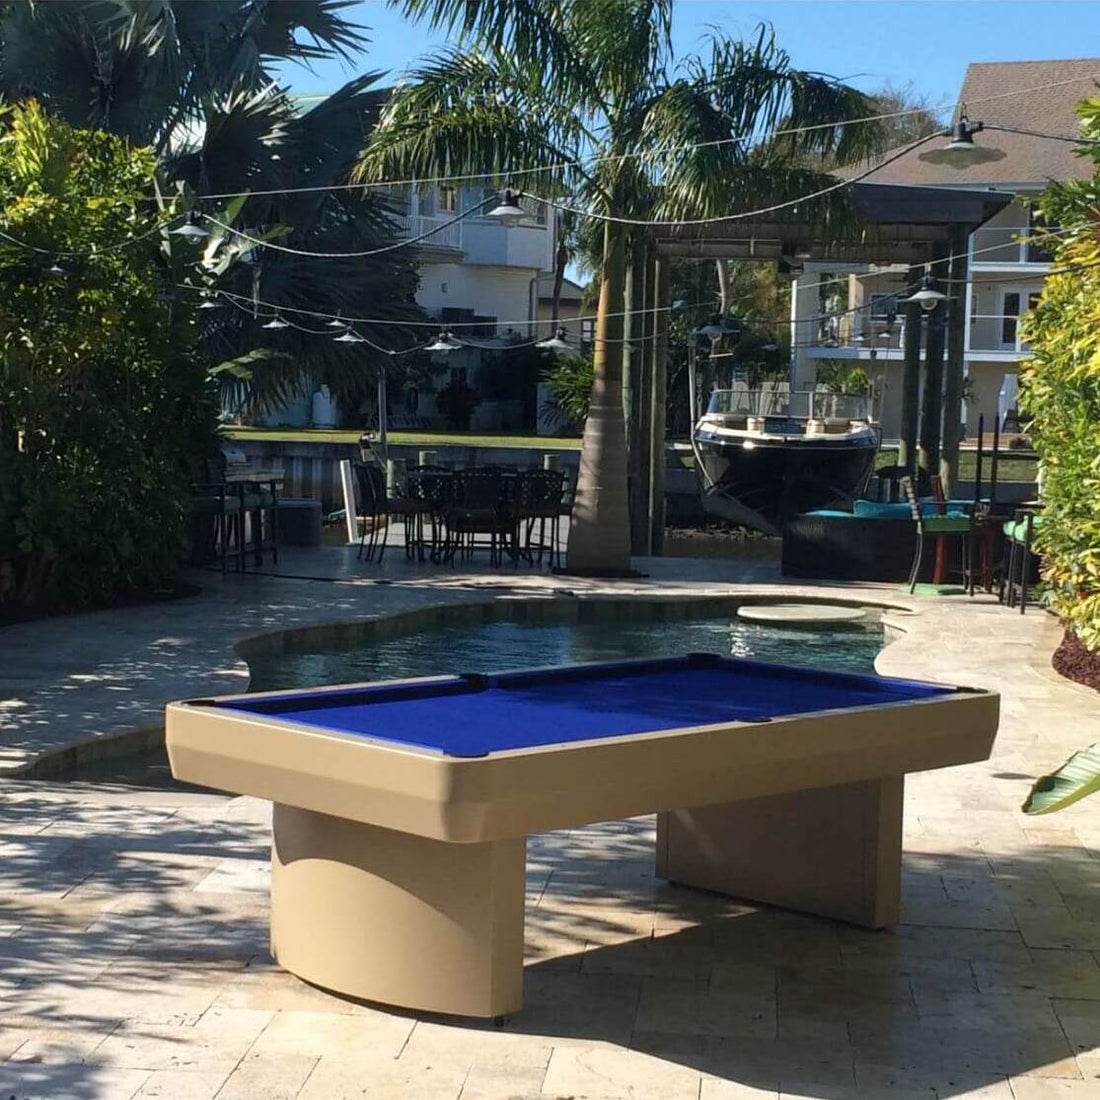 How Much Is a Pool Table? A Pool Table Buying Guide